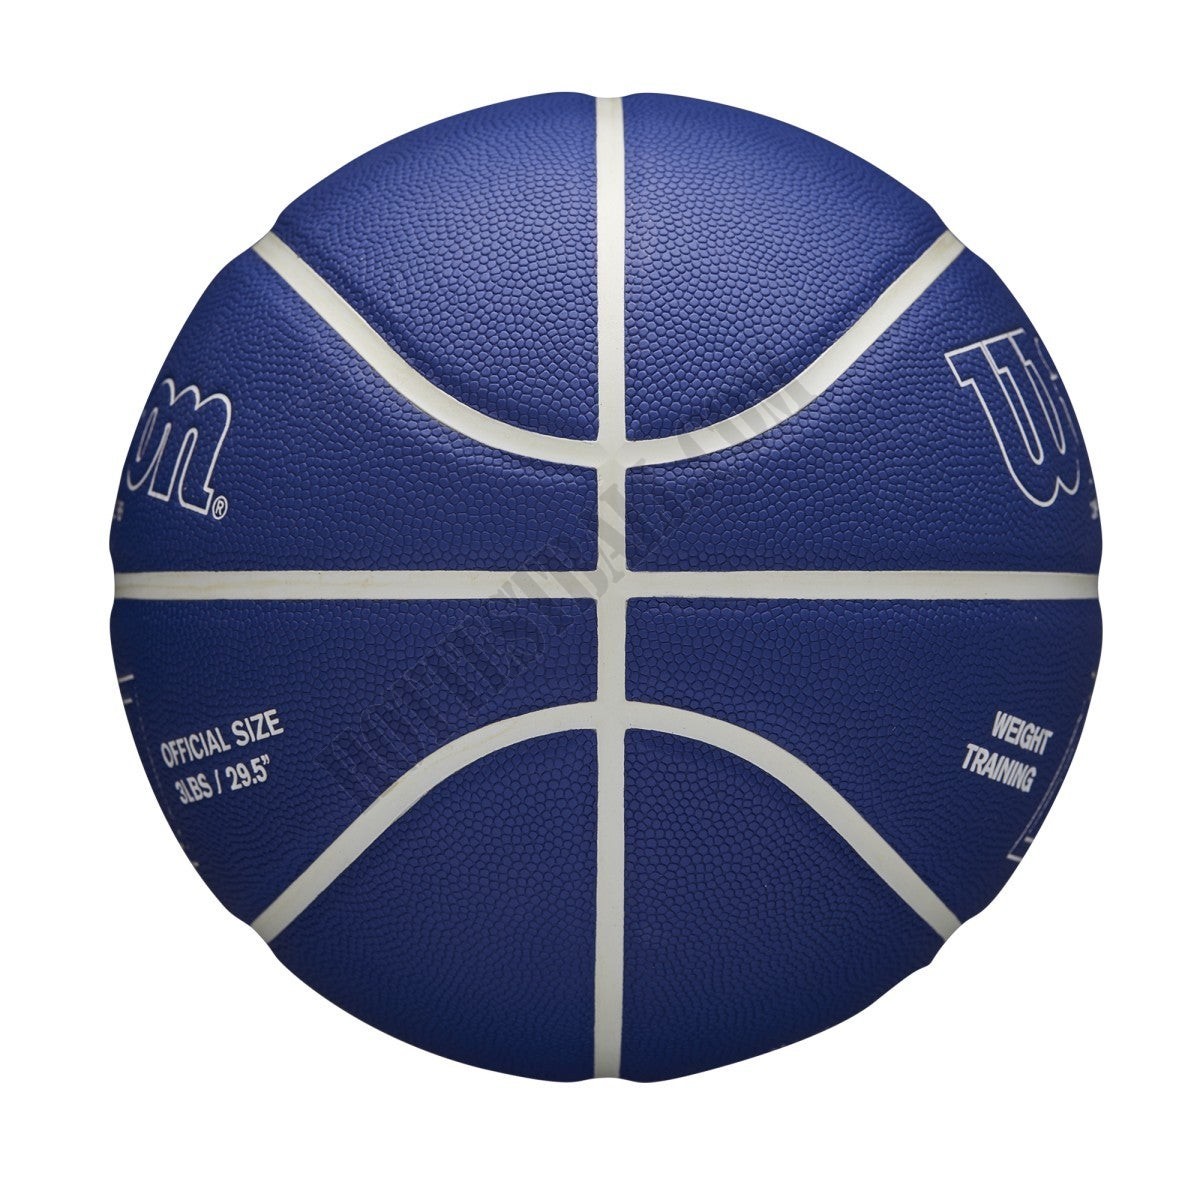 Chris Brickley Weighted Training Basketball - Wilson Discount Store - -3